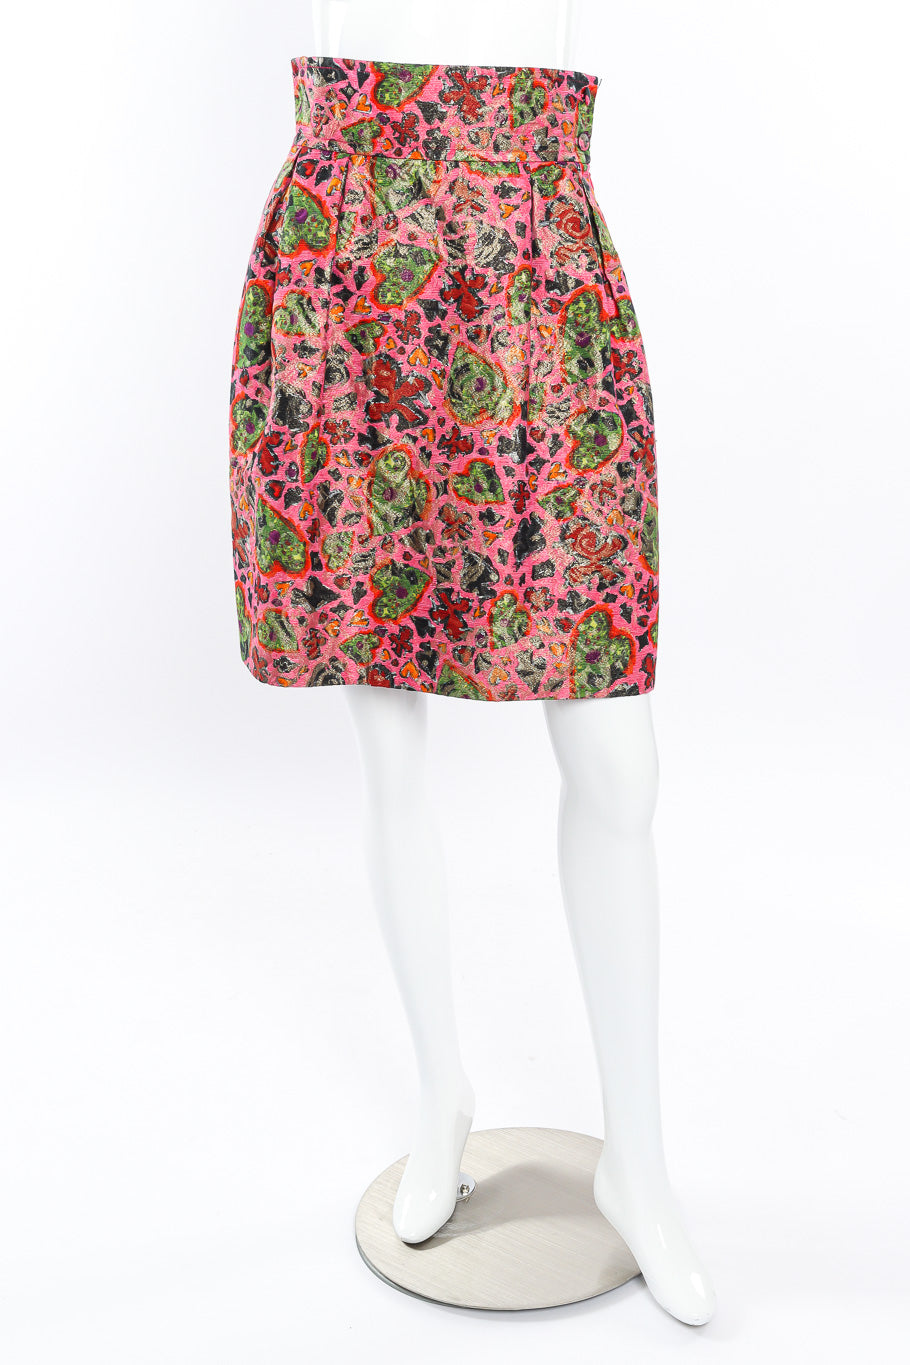 Vintage Christian Lacroix Abstract Print Skirt front view on mannequin @Recessla